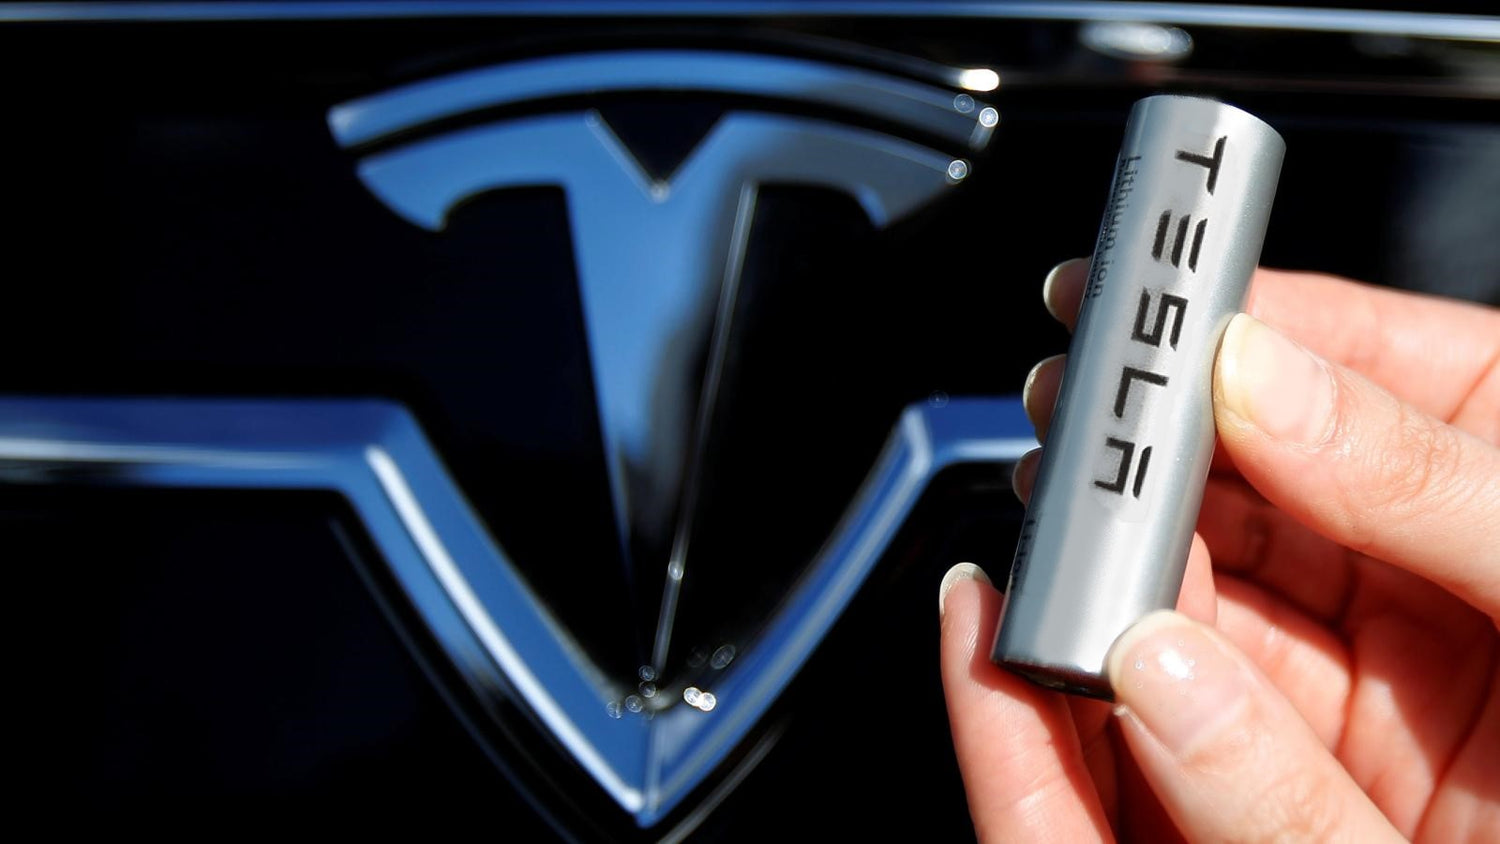 Tesla Will Mainly Focus on Battery in The Upcoming Investor Day, Says Elon Musk